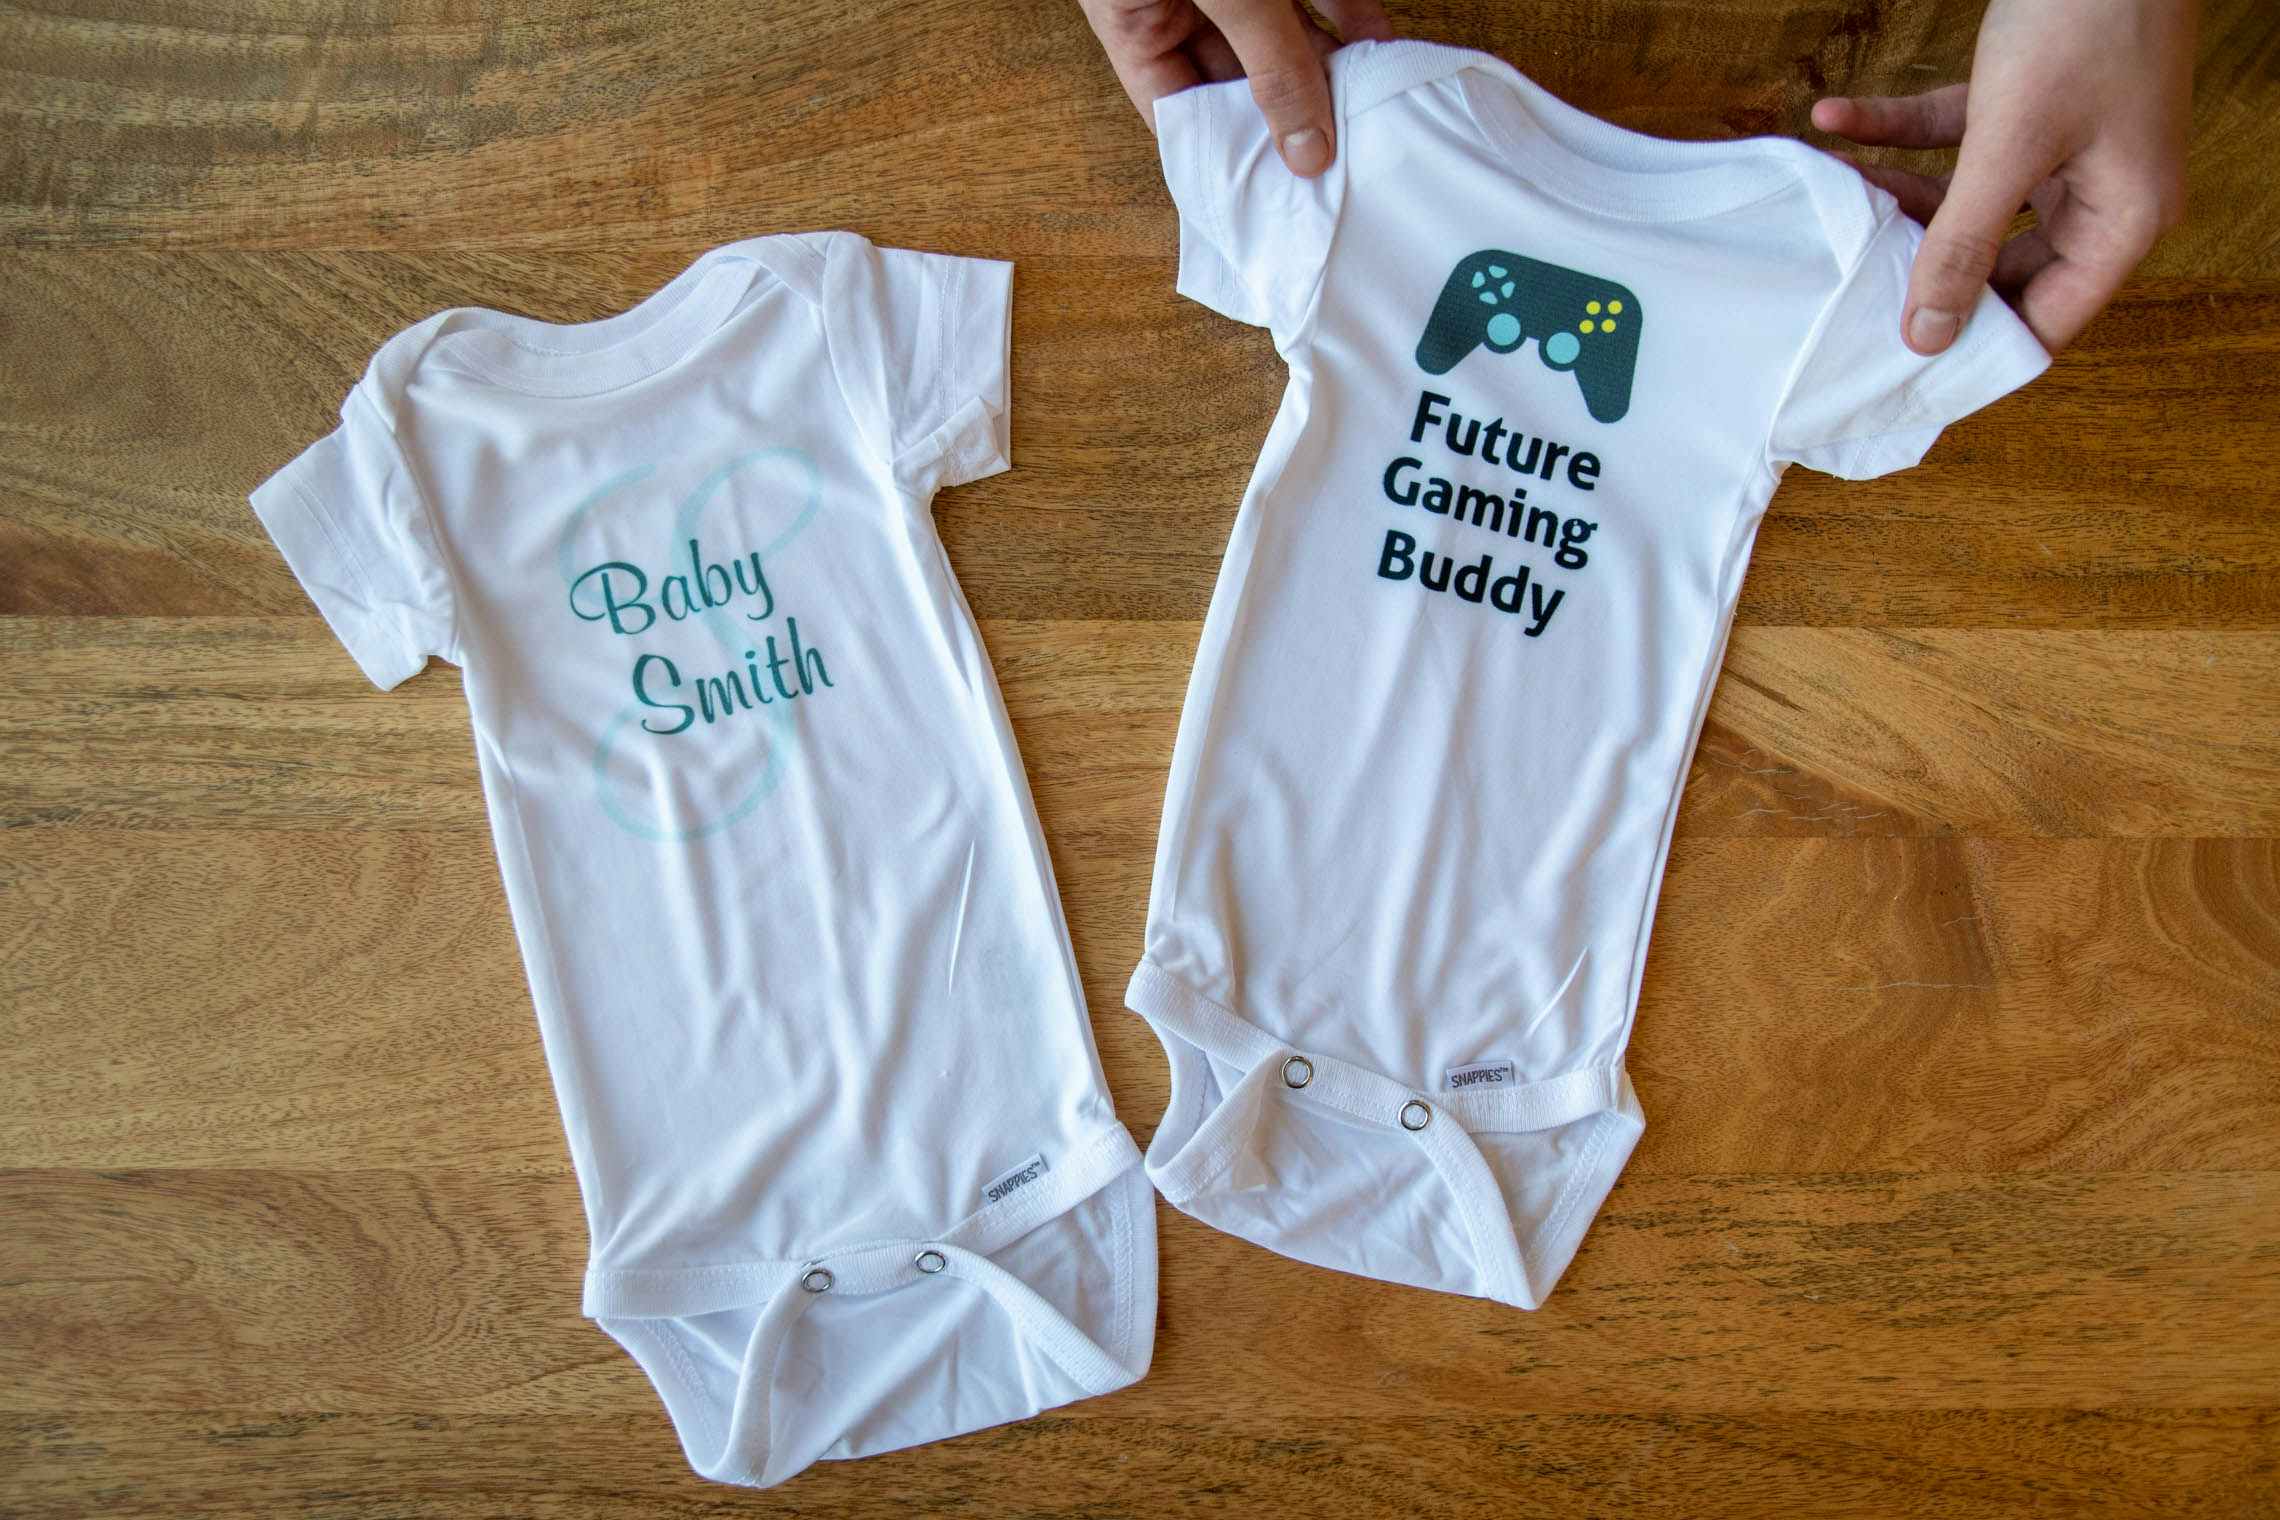 Two onesies, one with "baby smith" on it. The other with a gaming system controller and words, "future gaming buddy